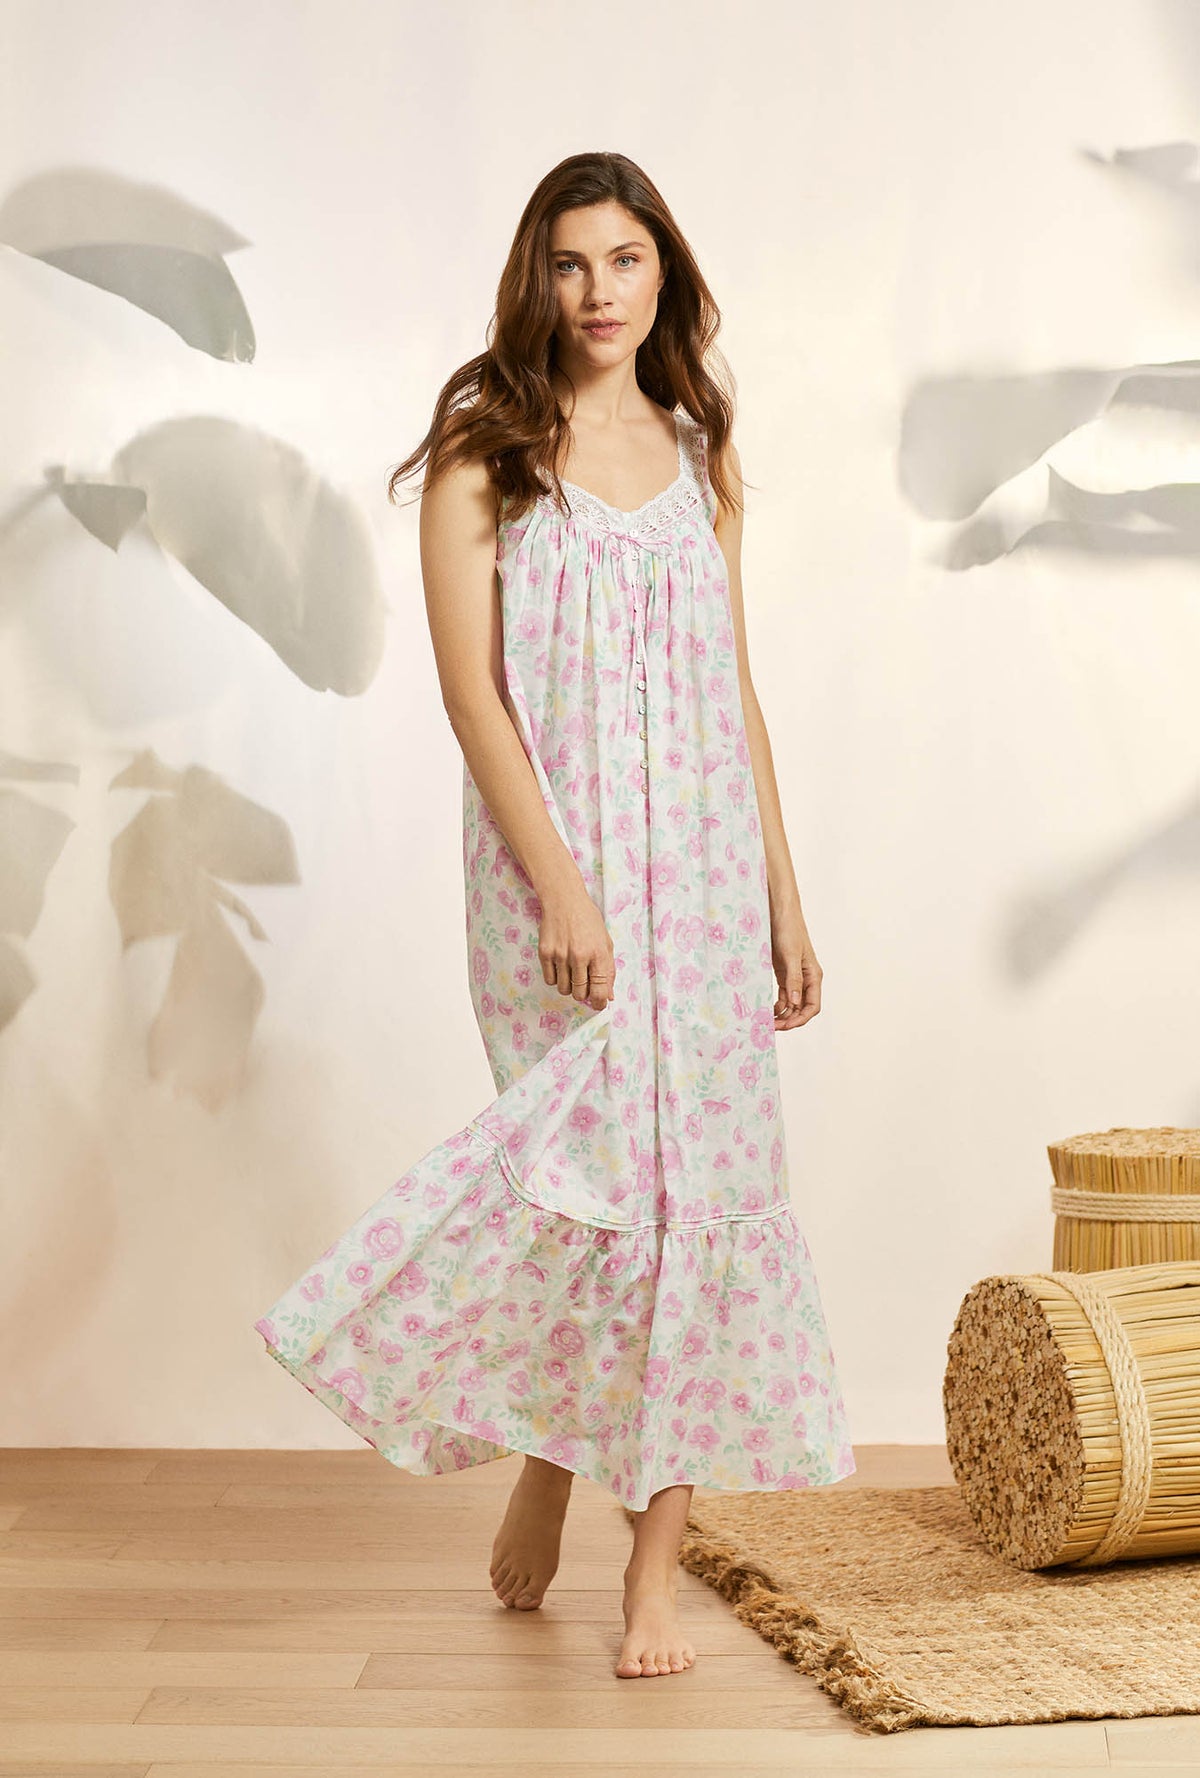 A lady wearing pink sleeveless elizabeth cotton nightgown with wildflower print.